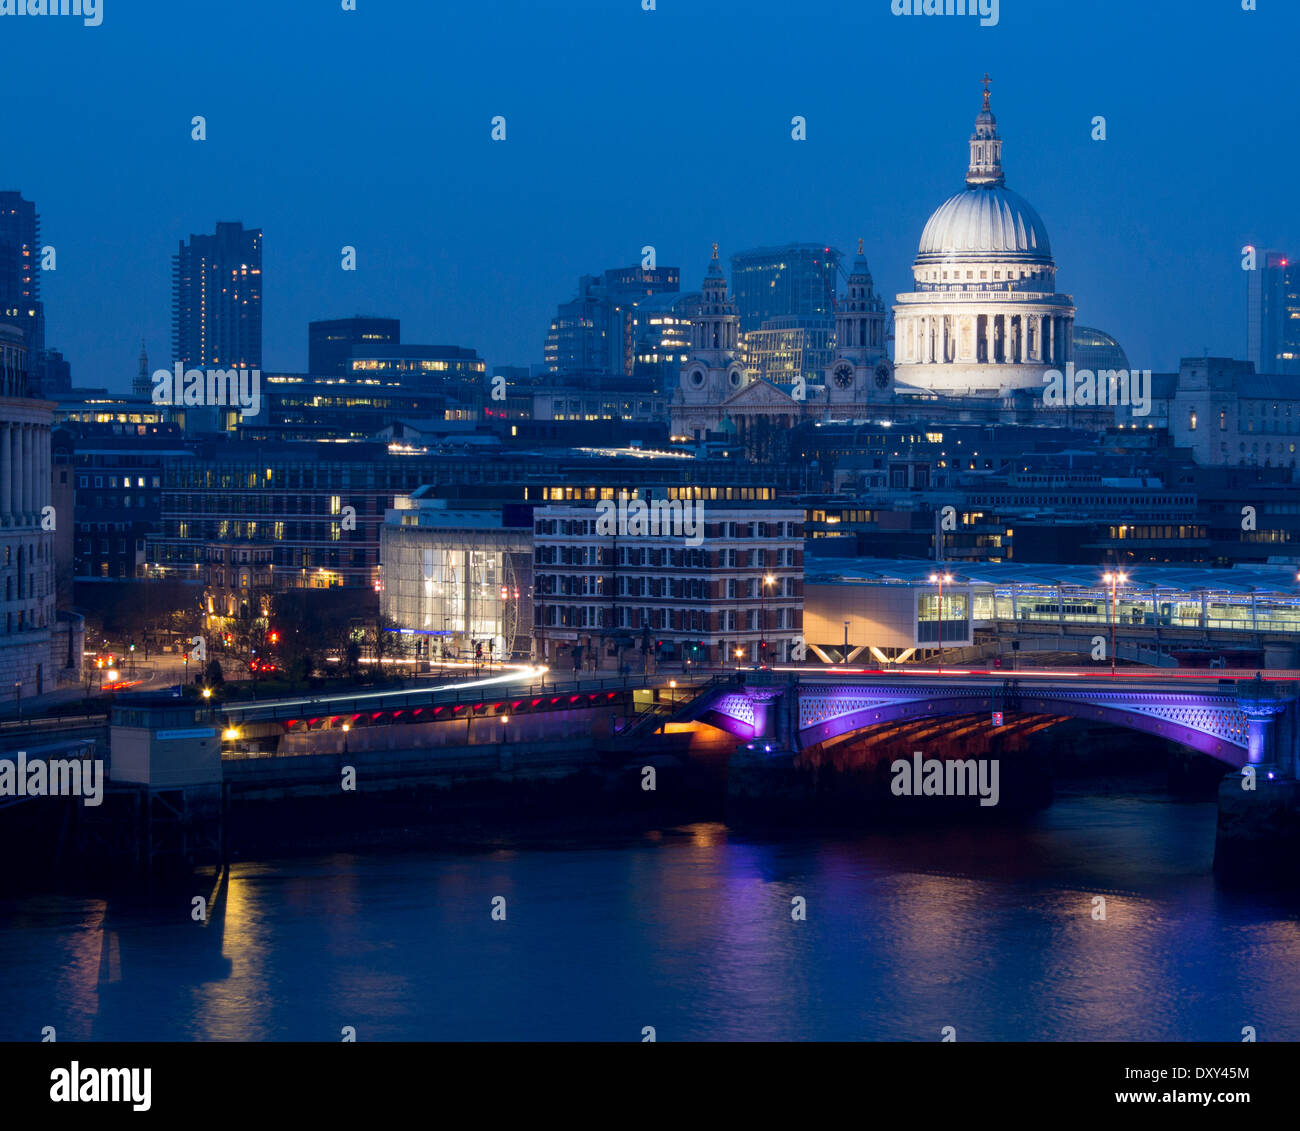 St Paul's Cathedral, Blackfriars Bridge, River Thames and City skyline at night from Oxo Tower London England UK Stock Photo